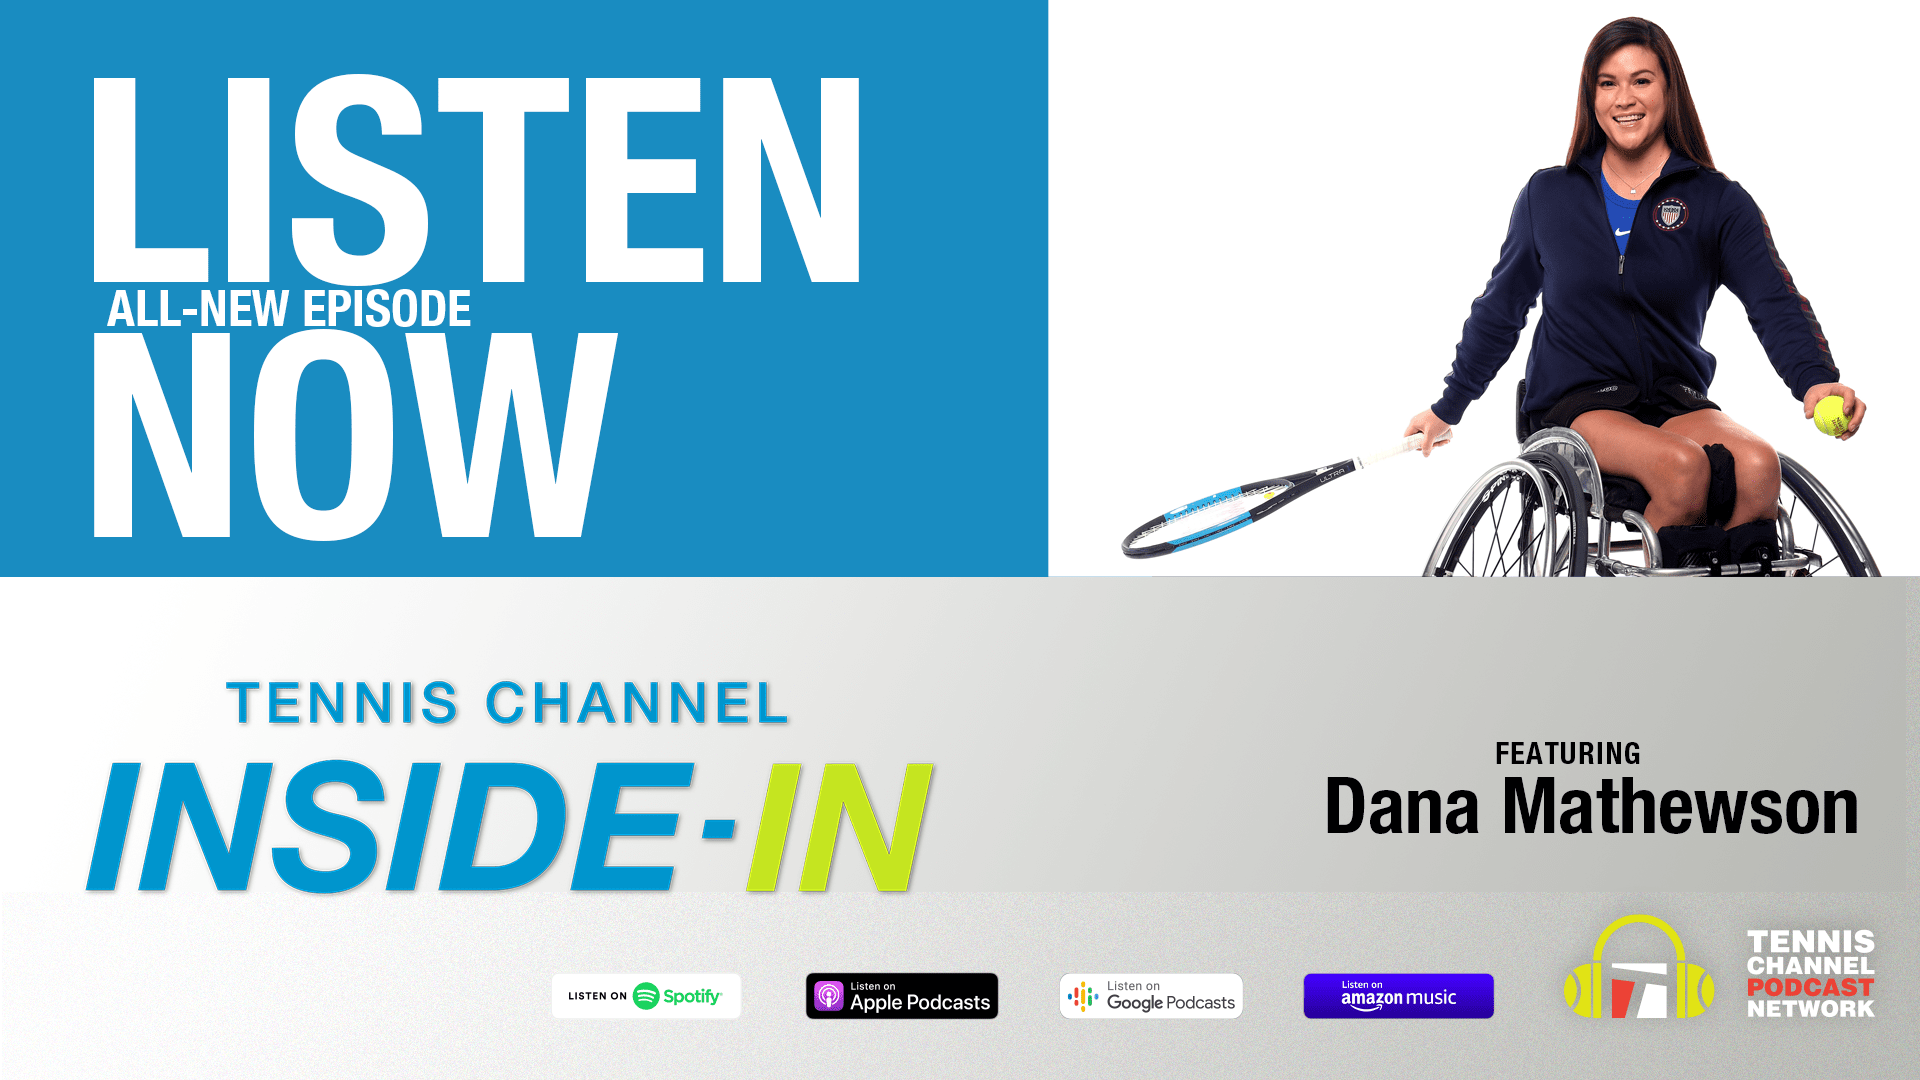 Tennis Channel Inside-In featuring Dana Mathewson A wheelchair tennis champion making history and changing perceptions